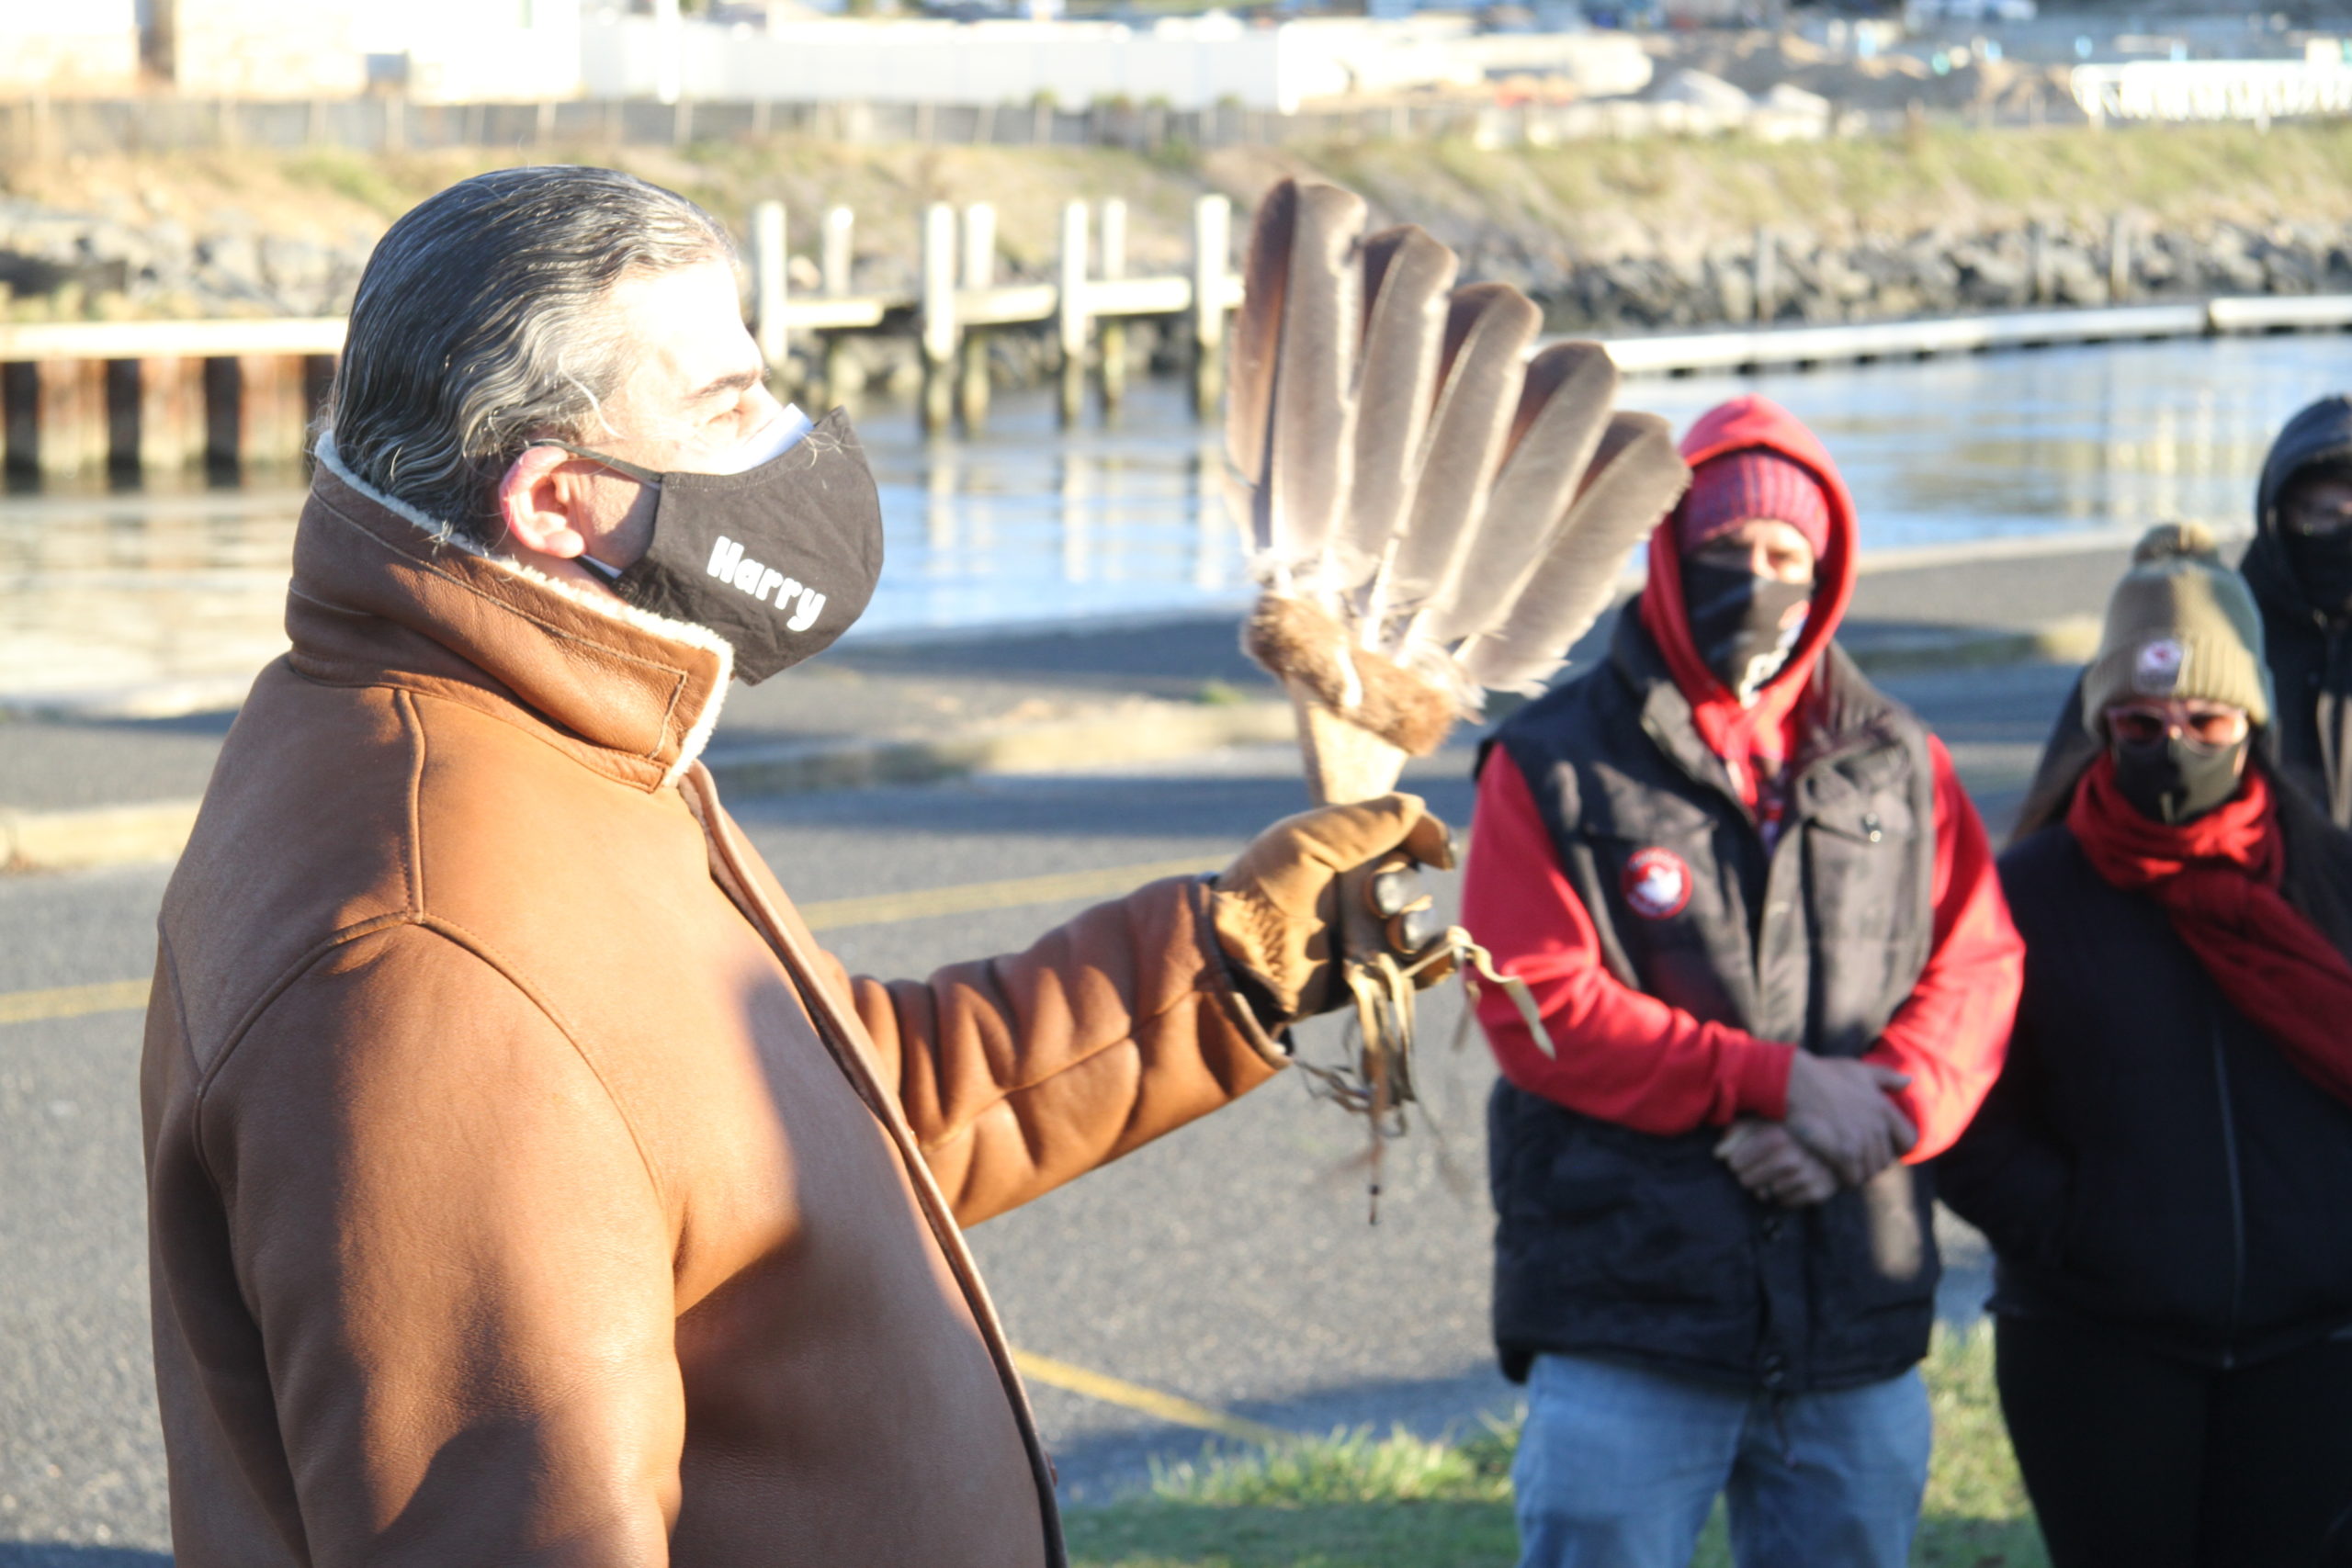 Members of the Shinnecock Nation and dozens of supporters from other tribes, environmental groups and social justice organizations gathered on the banks of the Shinnecock Canal on Sunday afternoon to pray and protest overdevelopment in the region and the impacts humans have had on water quality in the region. 